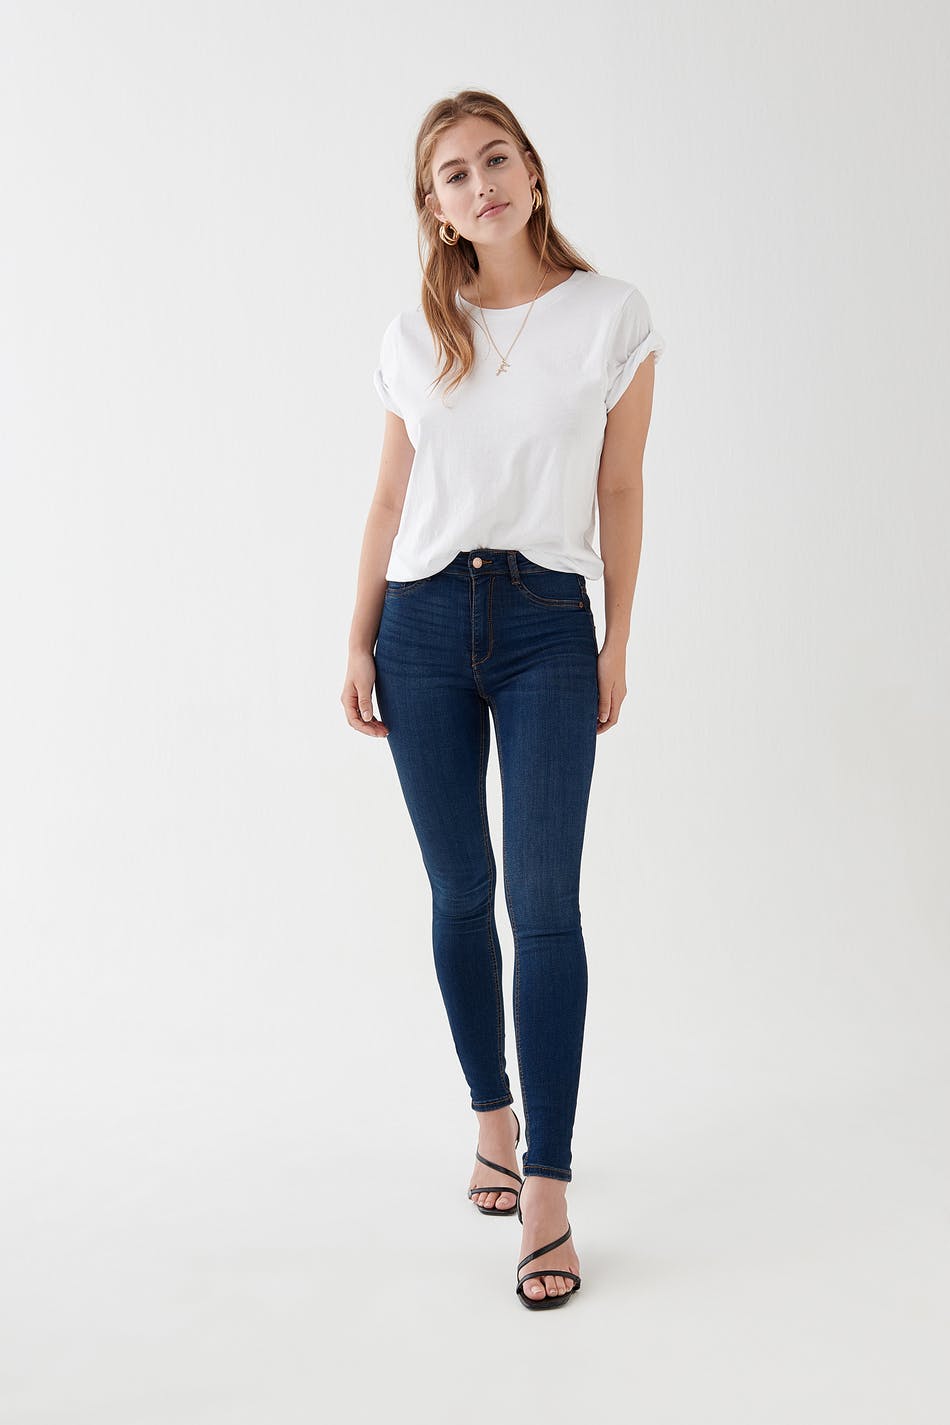 molly high waist jeans gina tricot